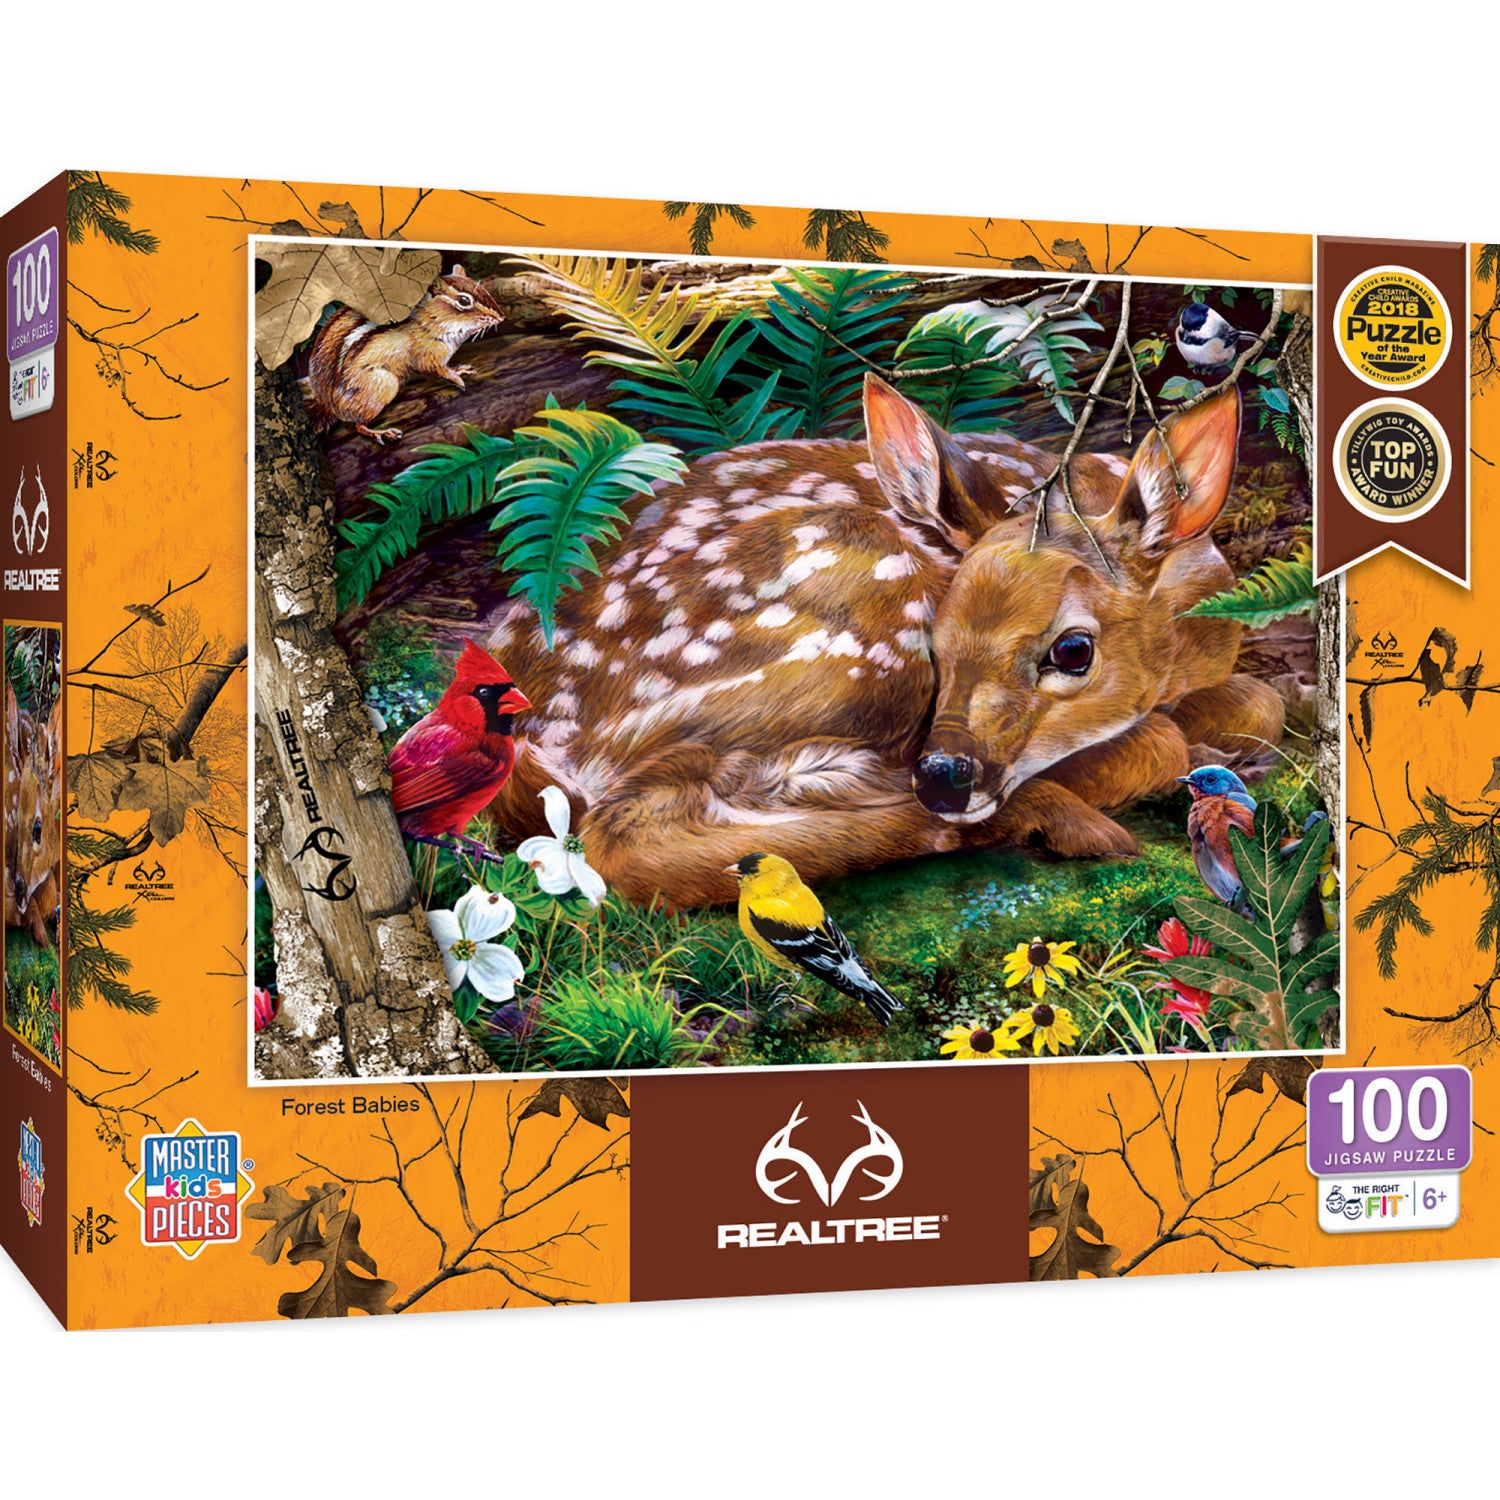 Realtree - Forest Babies 100 Piece Kids Puzzle